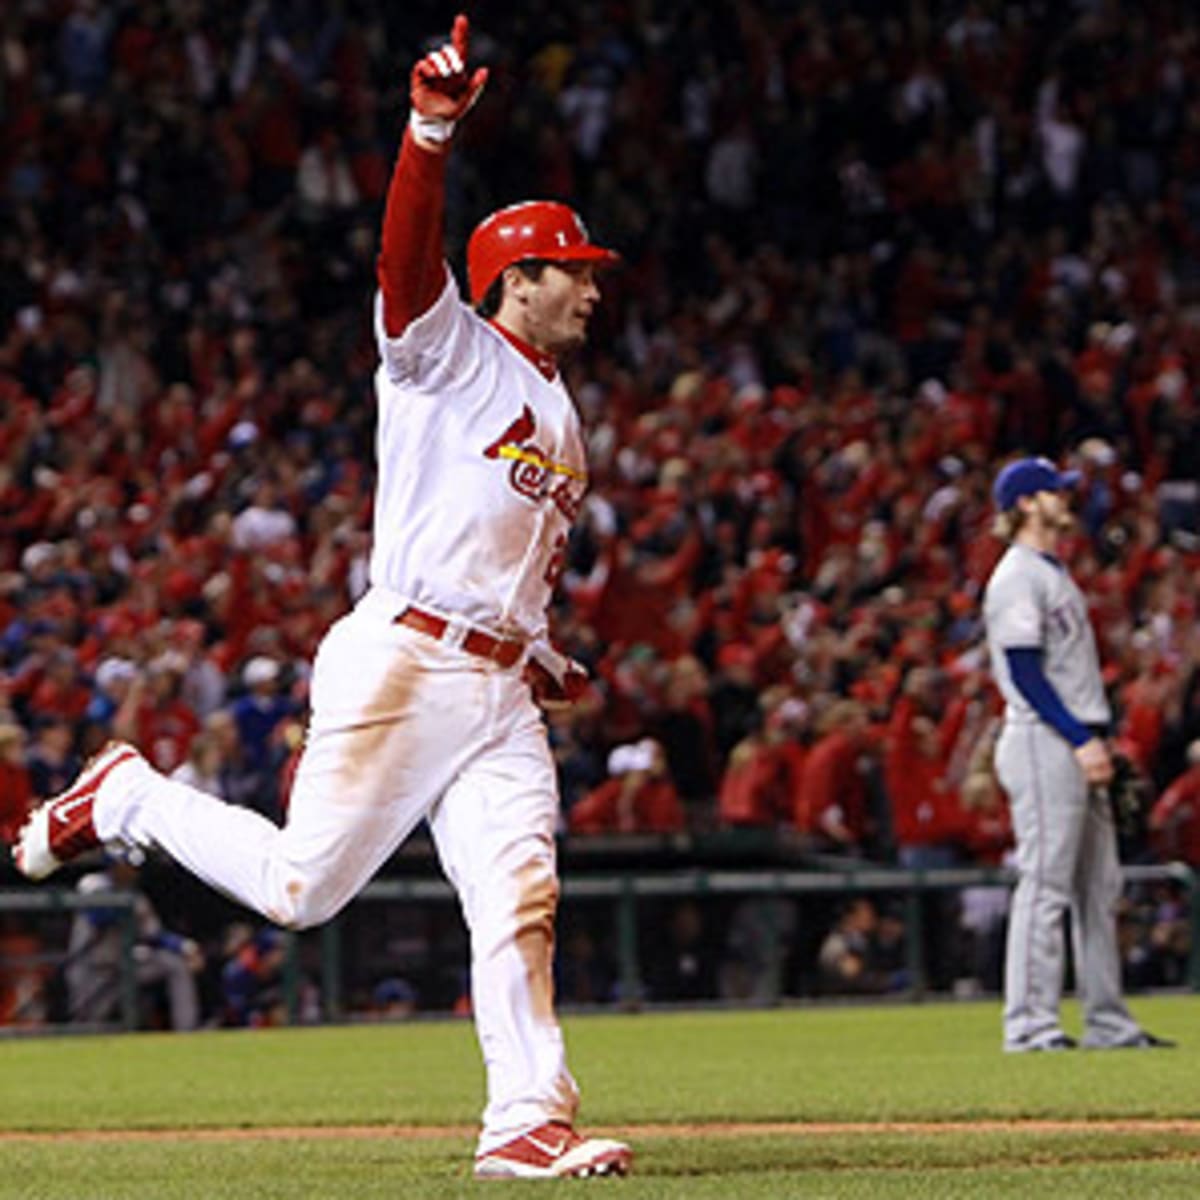 WS2011 Gm6: Freese's walk-off shot sends it to Game 7 